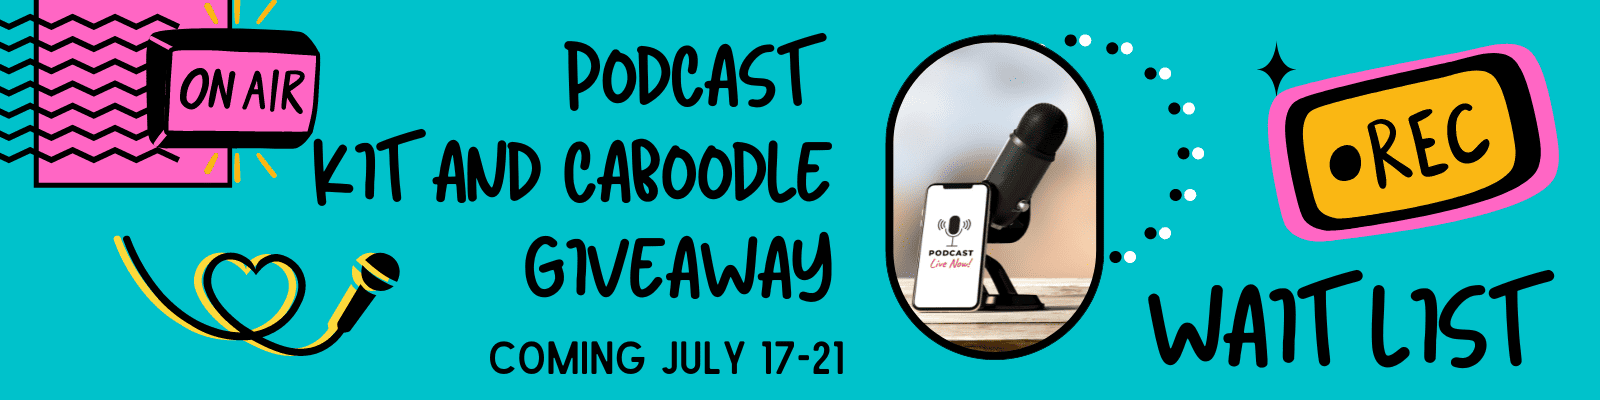 illustrations of podcast icons with name of upcoming Podcast Kit and Caboodle Giveaway and Wait List along iwth dates of event--July 17-21